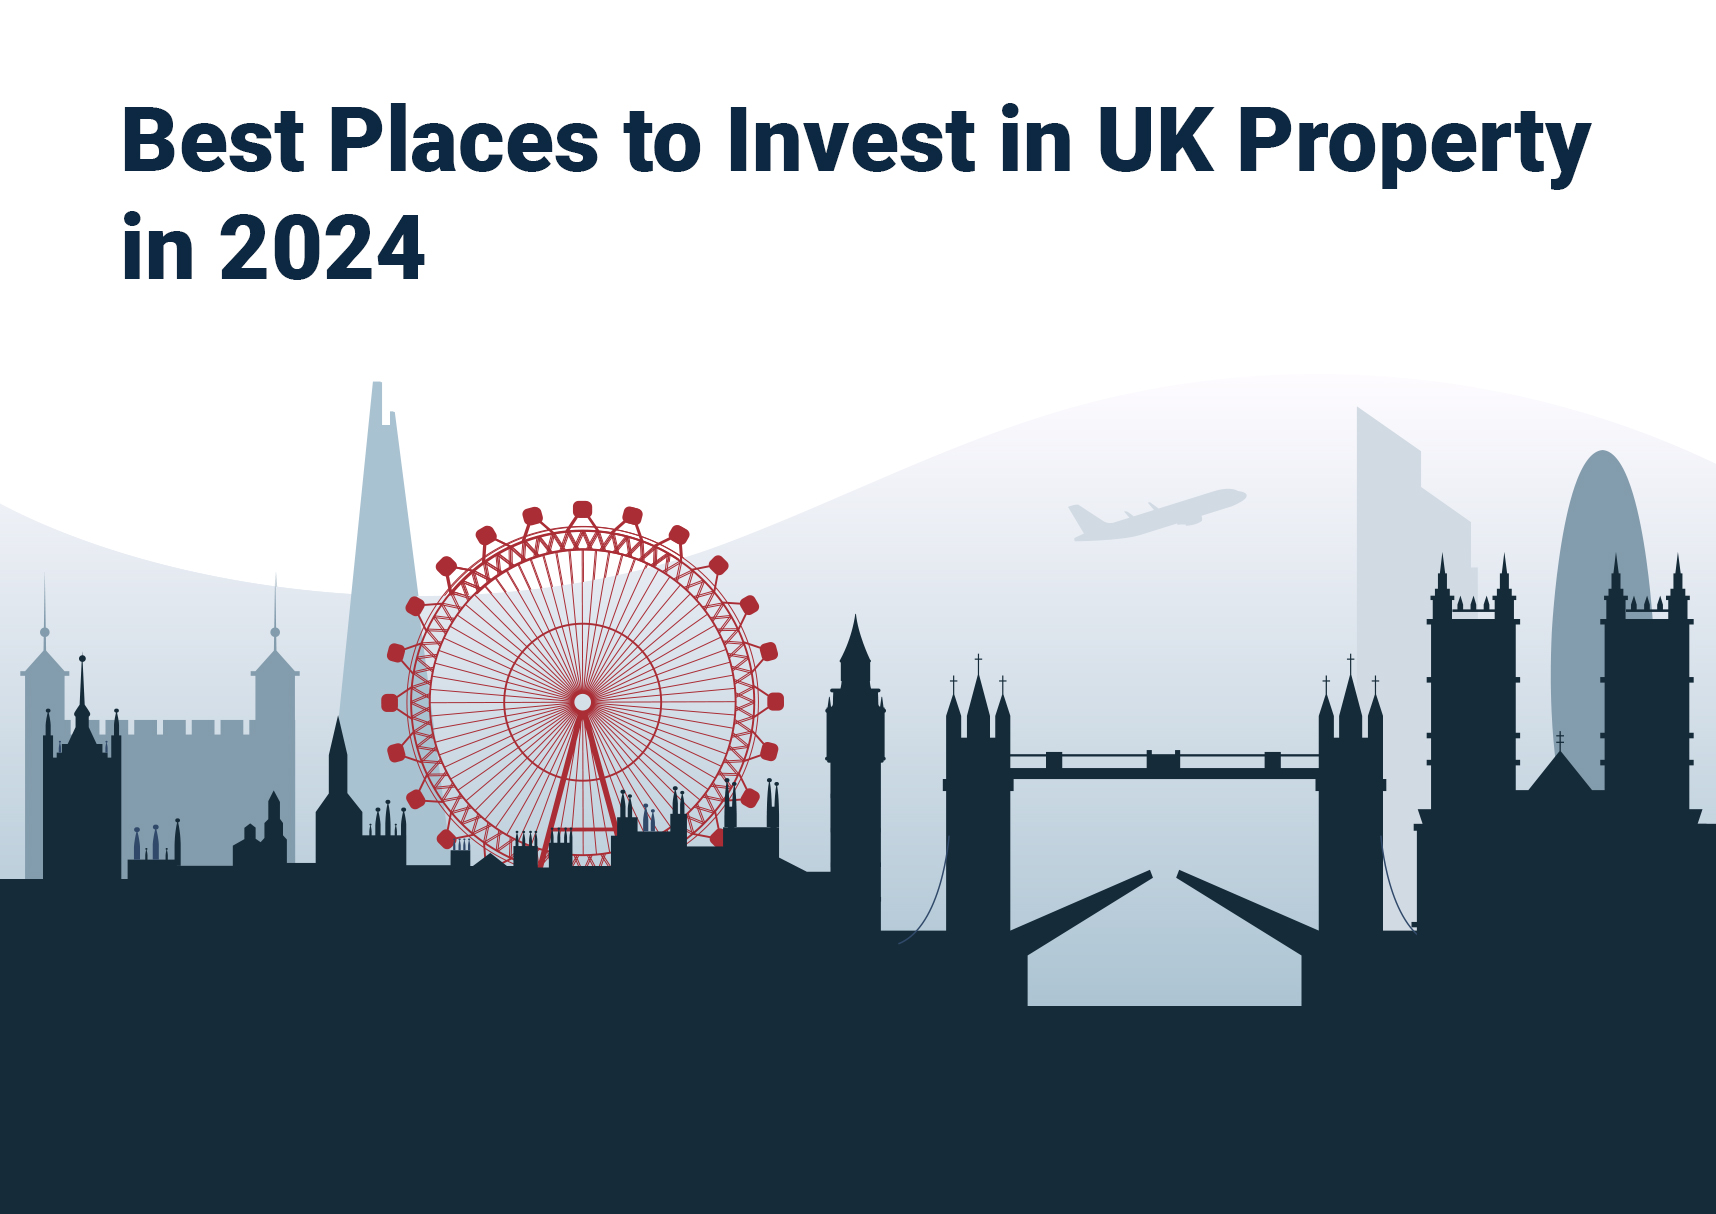 Best Places to Invest in UK Property in 2024